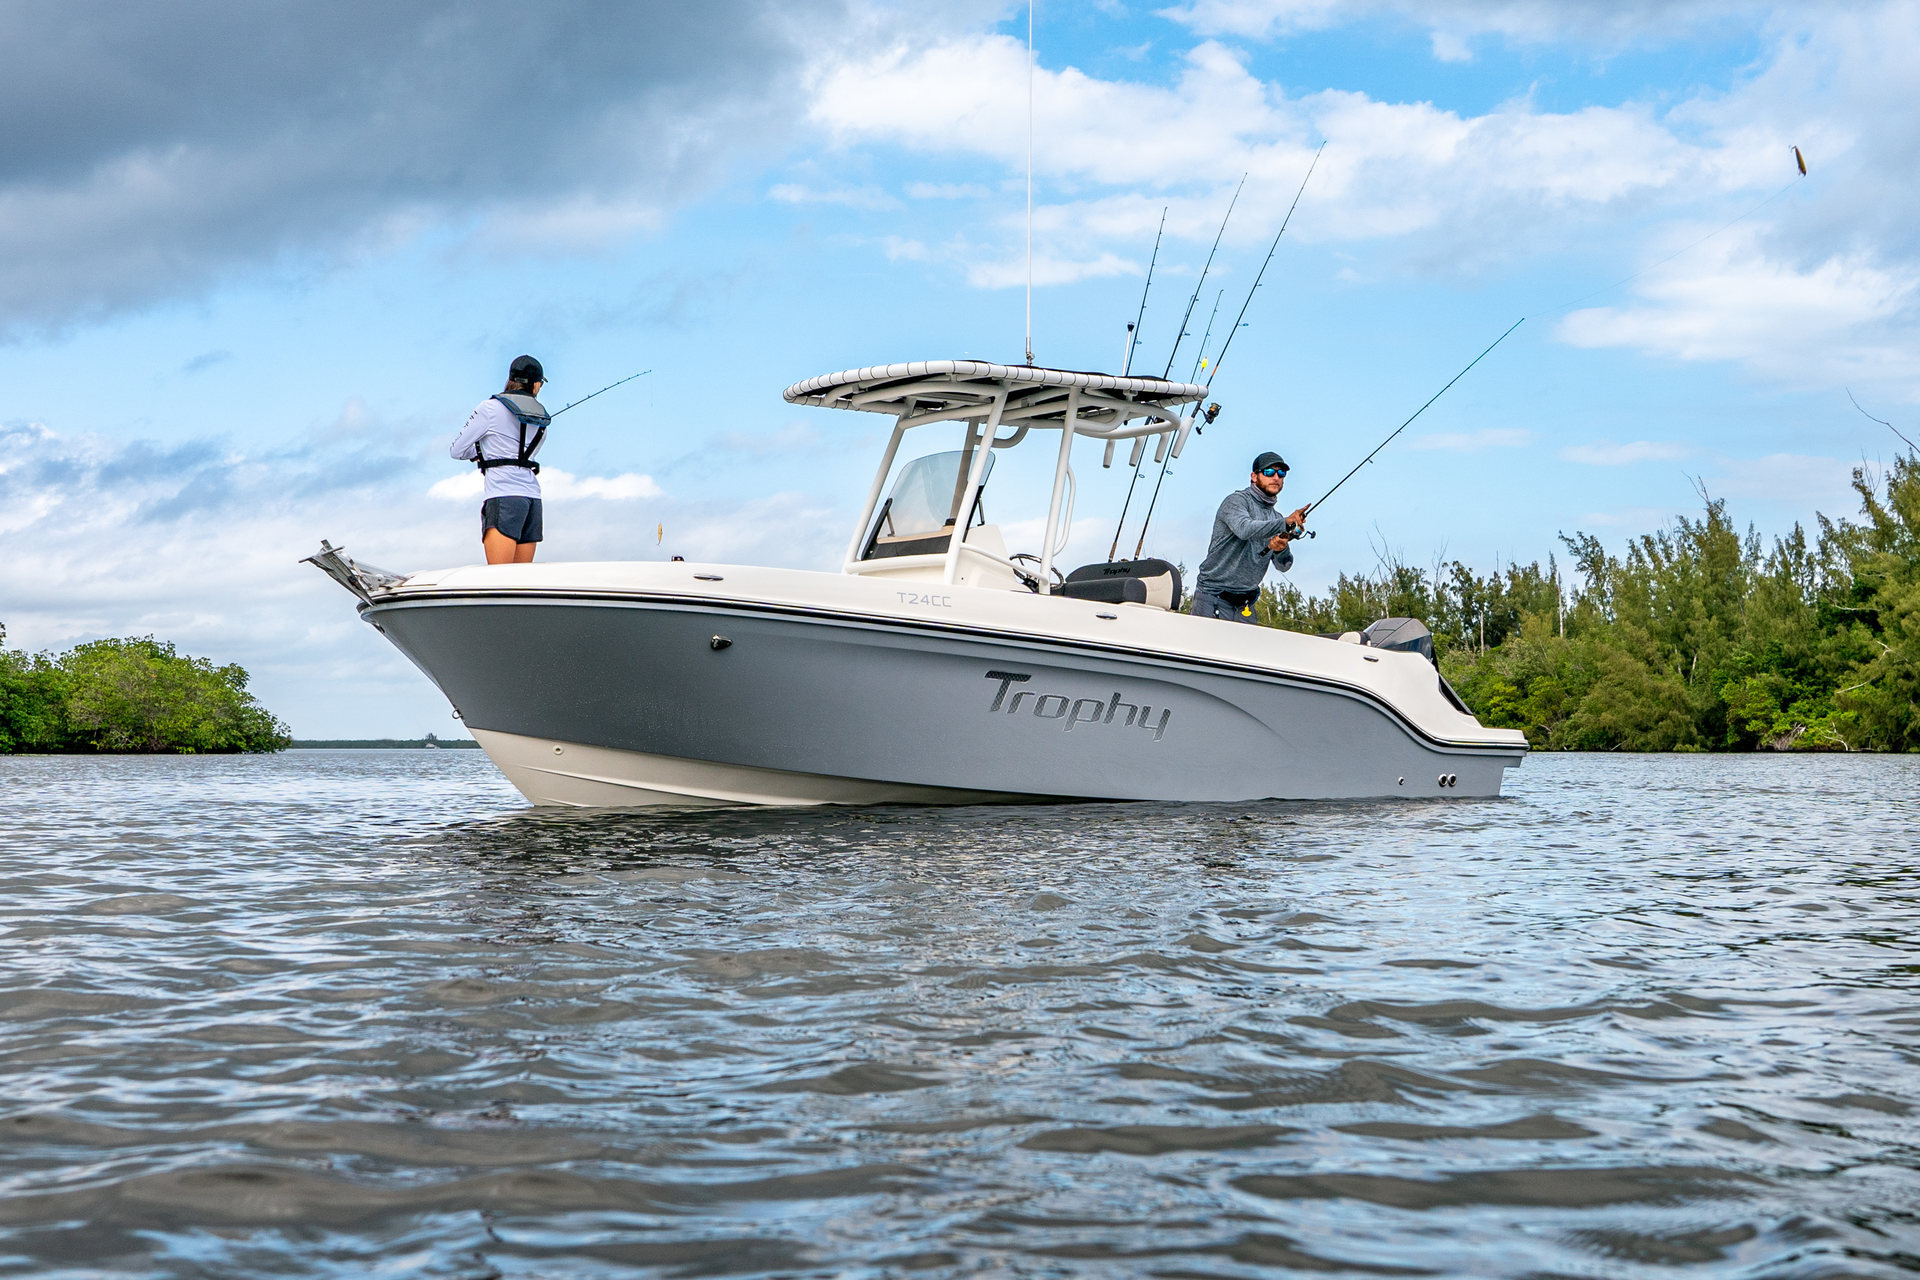 360 VR Virtual Tours of the Bayliner Trophy T24CC